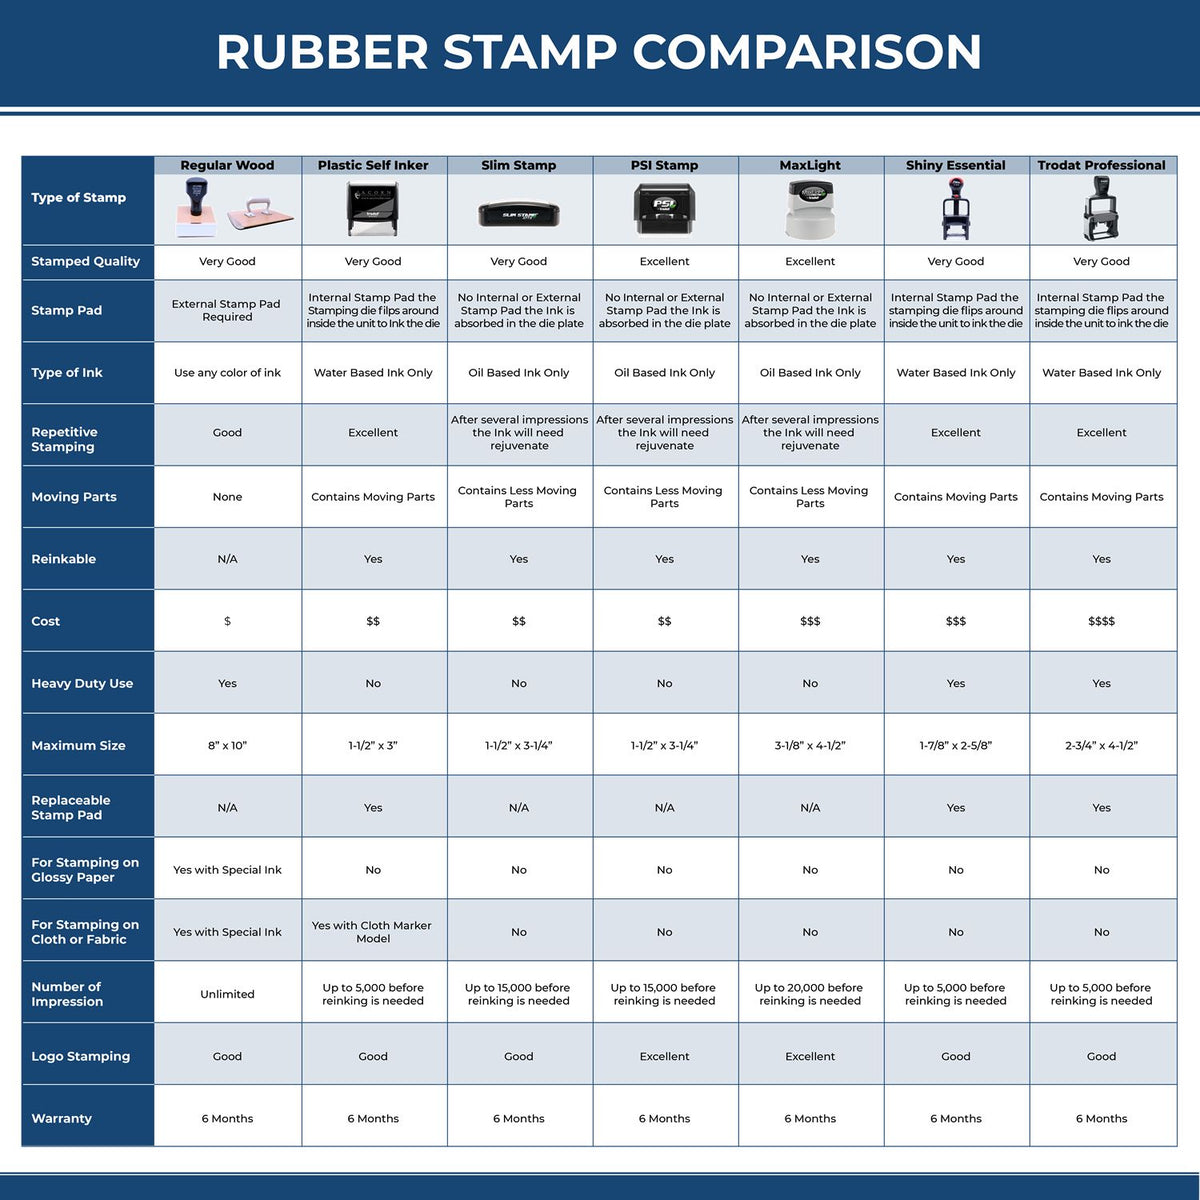 A comparison chart for the different types of mount models available for the PSI Illinois Notary Stamp.